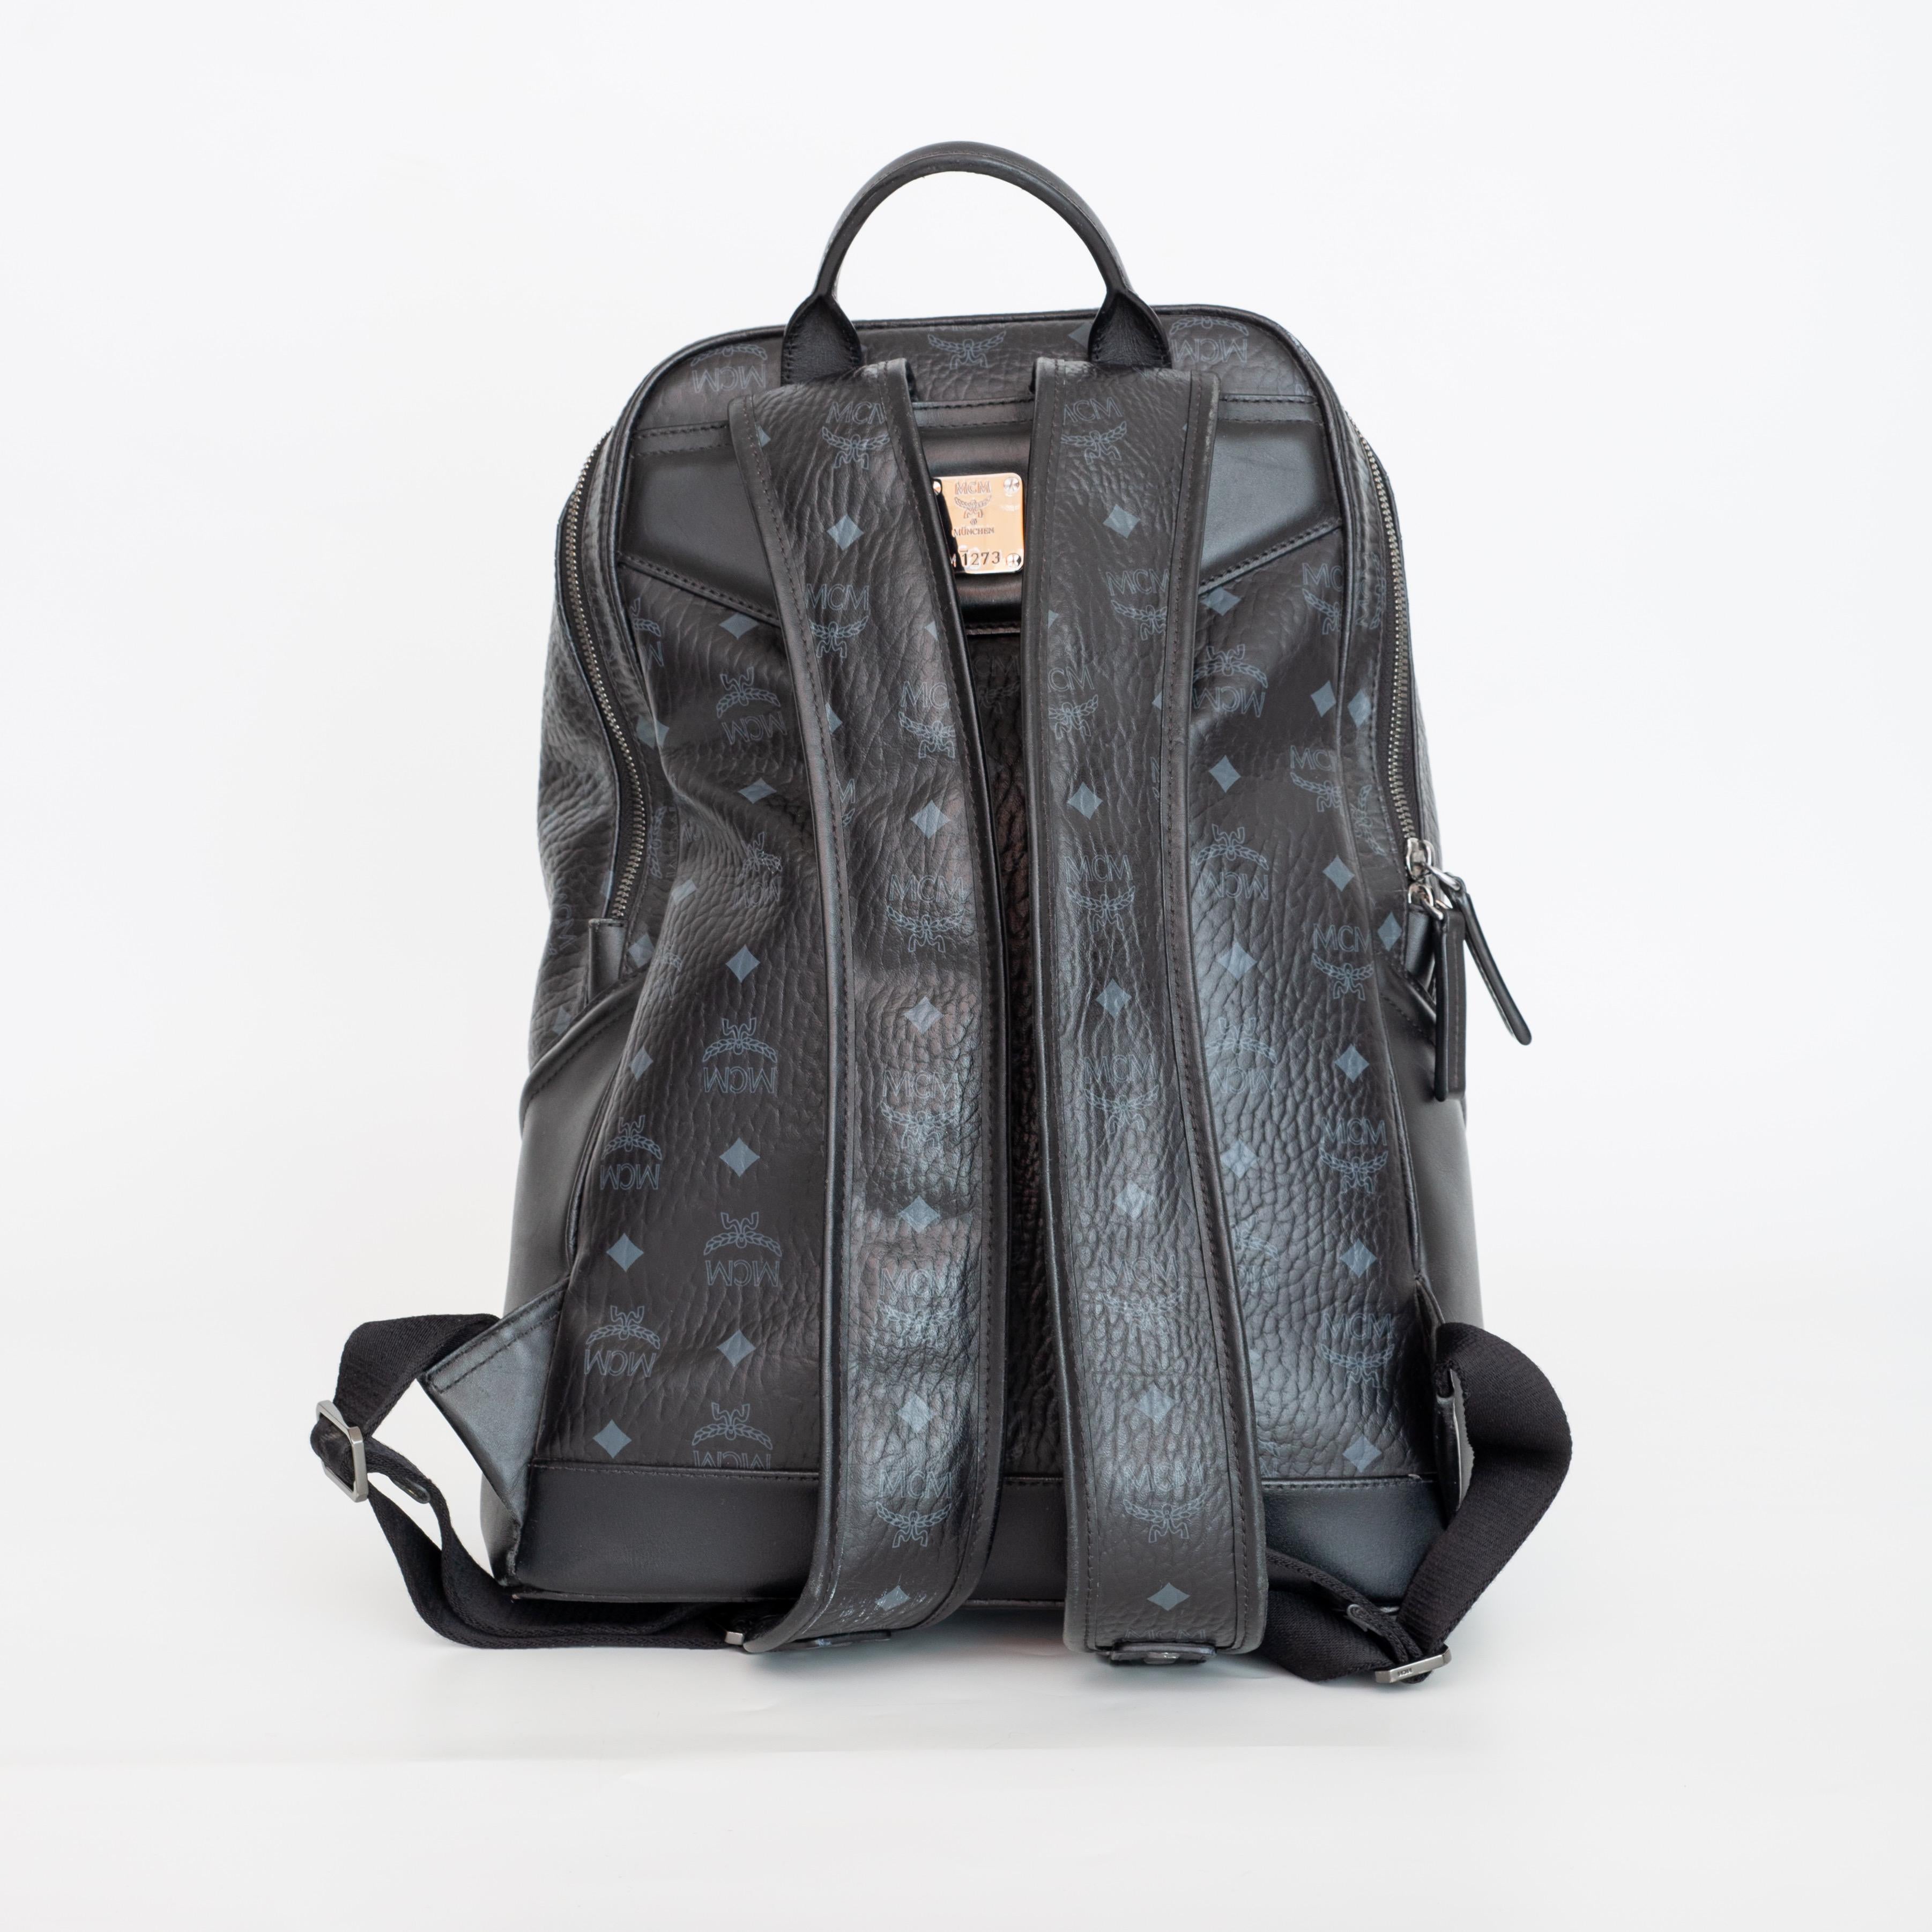 This backpacks features a coated canvas exterior, a leather top handle with leather trim and detail, adjustable shoulder straps, reinforced leather bottom corners, two-way zip-around back compartment, zip-around front gusset compartment, interior